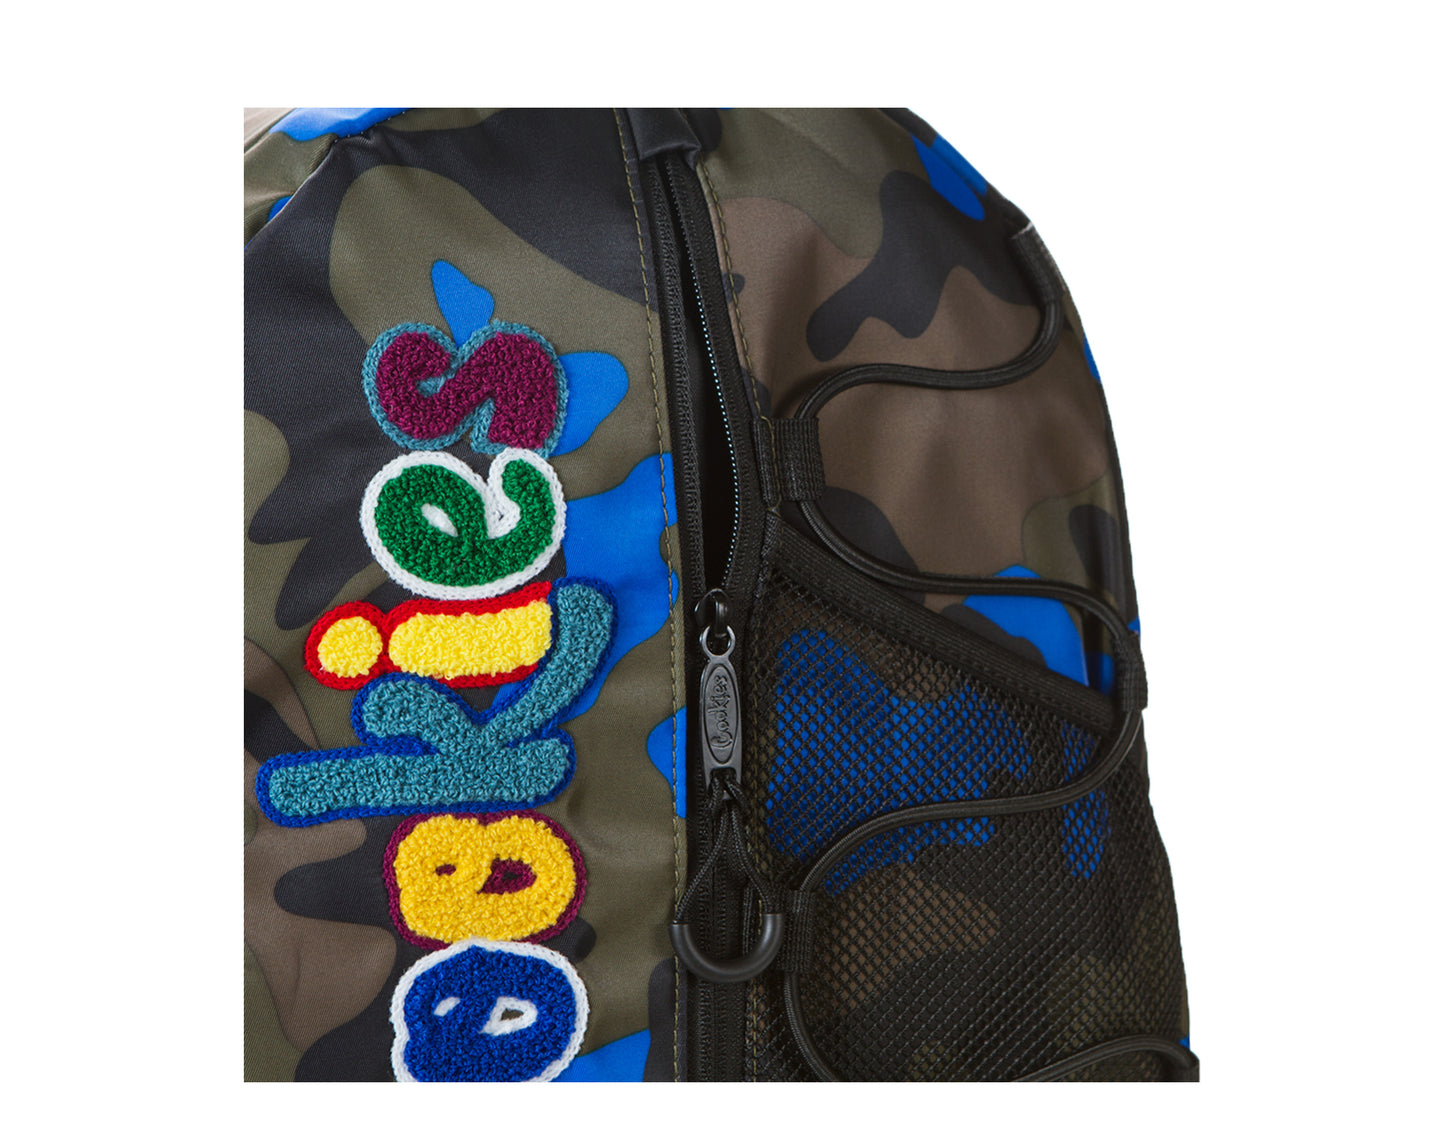 Cookies The Bungee Blue Camo Backpack 1546A4404-BLC